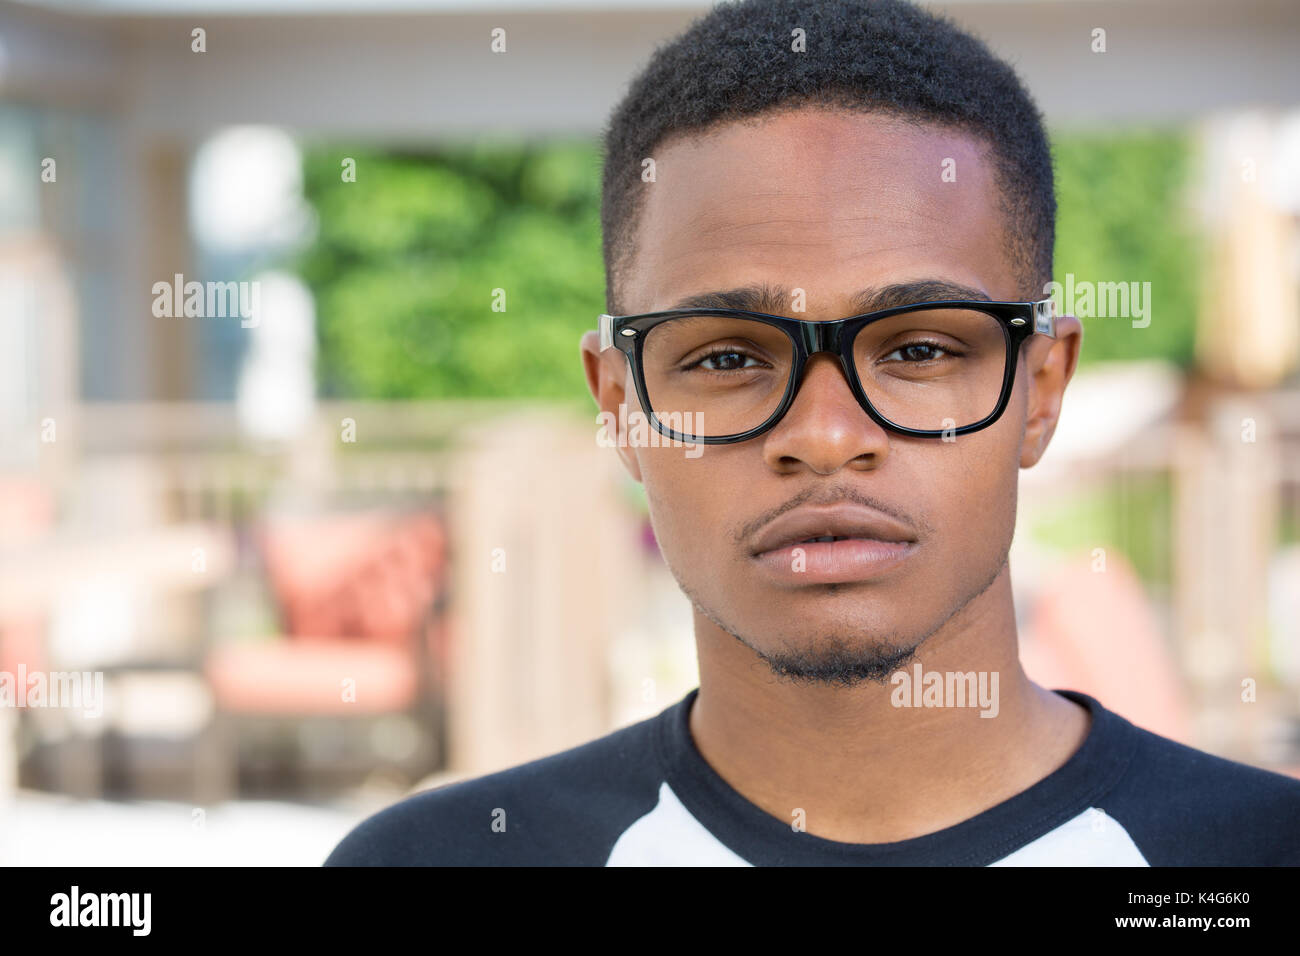 Closeup headshot portrait of fine young man with big glasses, undergrad student, straight face, isolated on outside outdoors background. Stock Photo